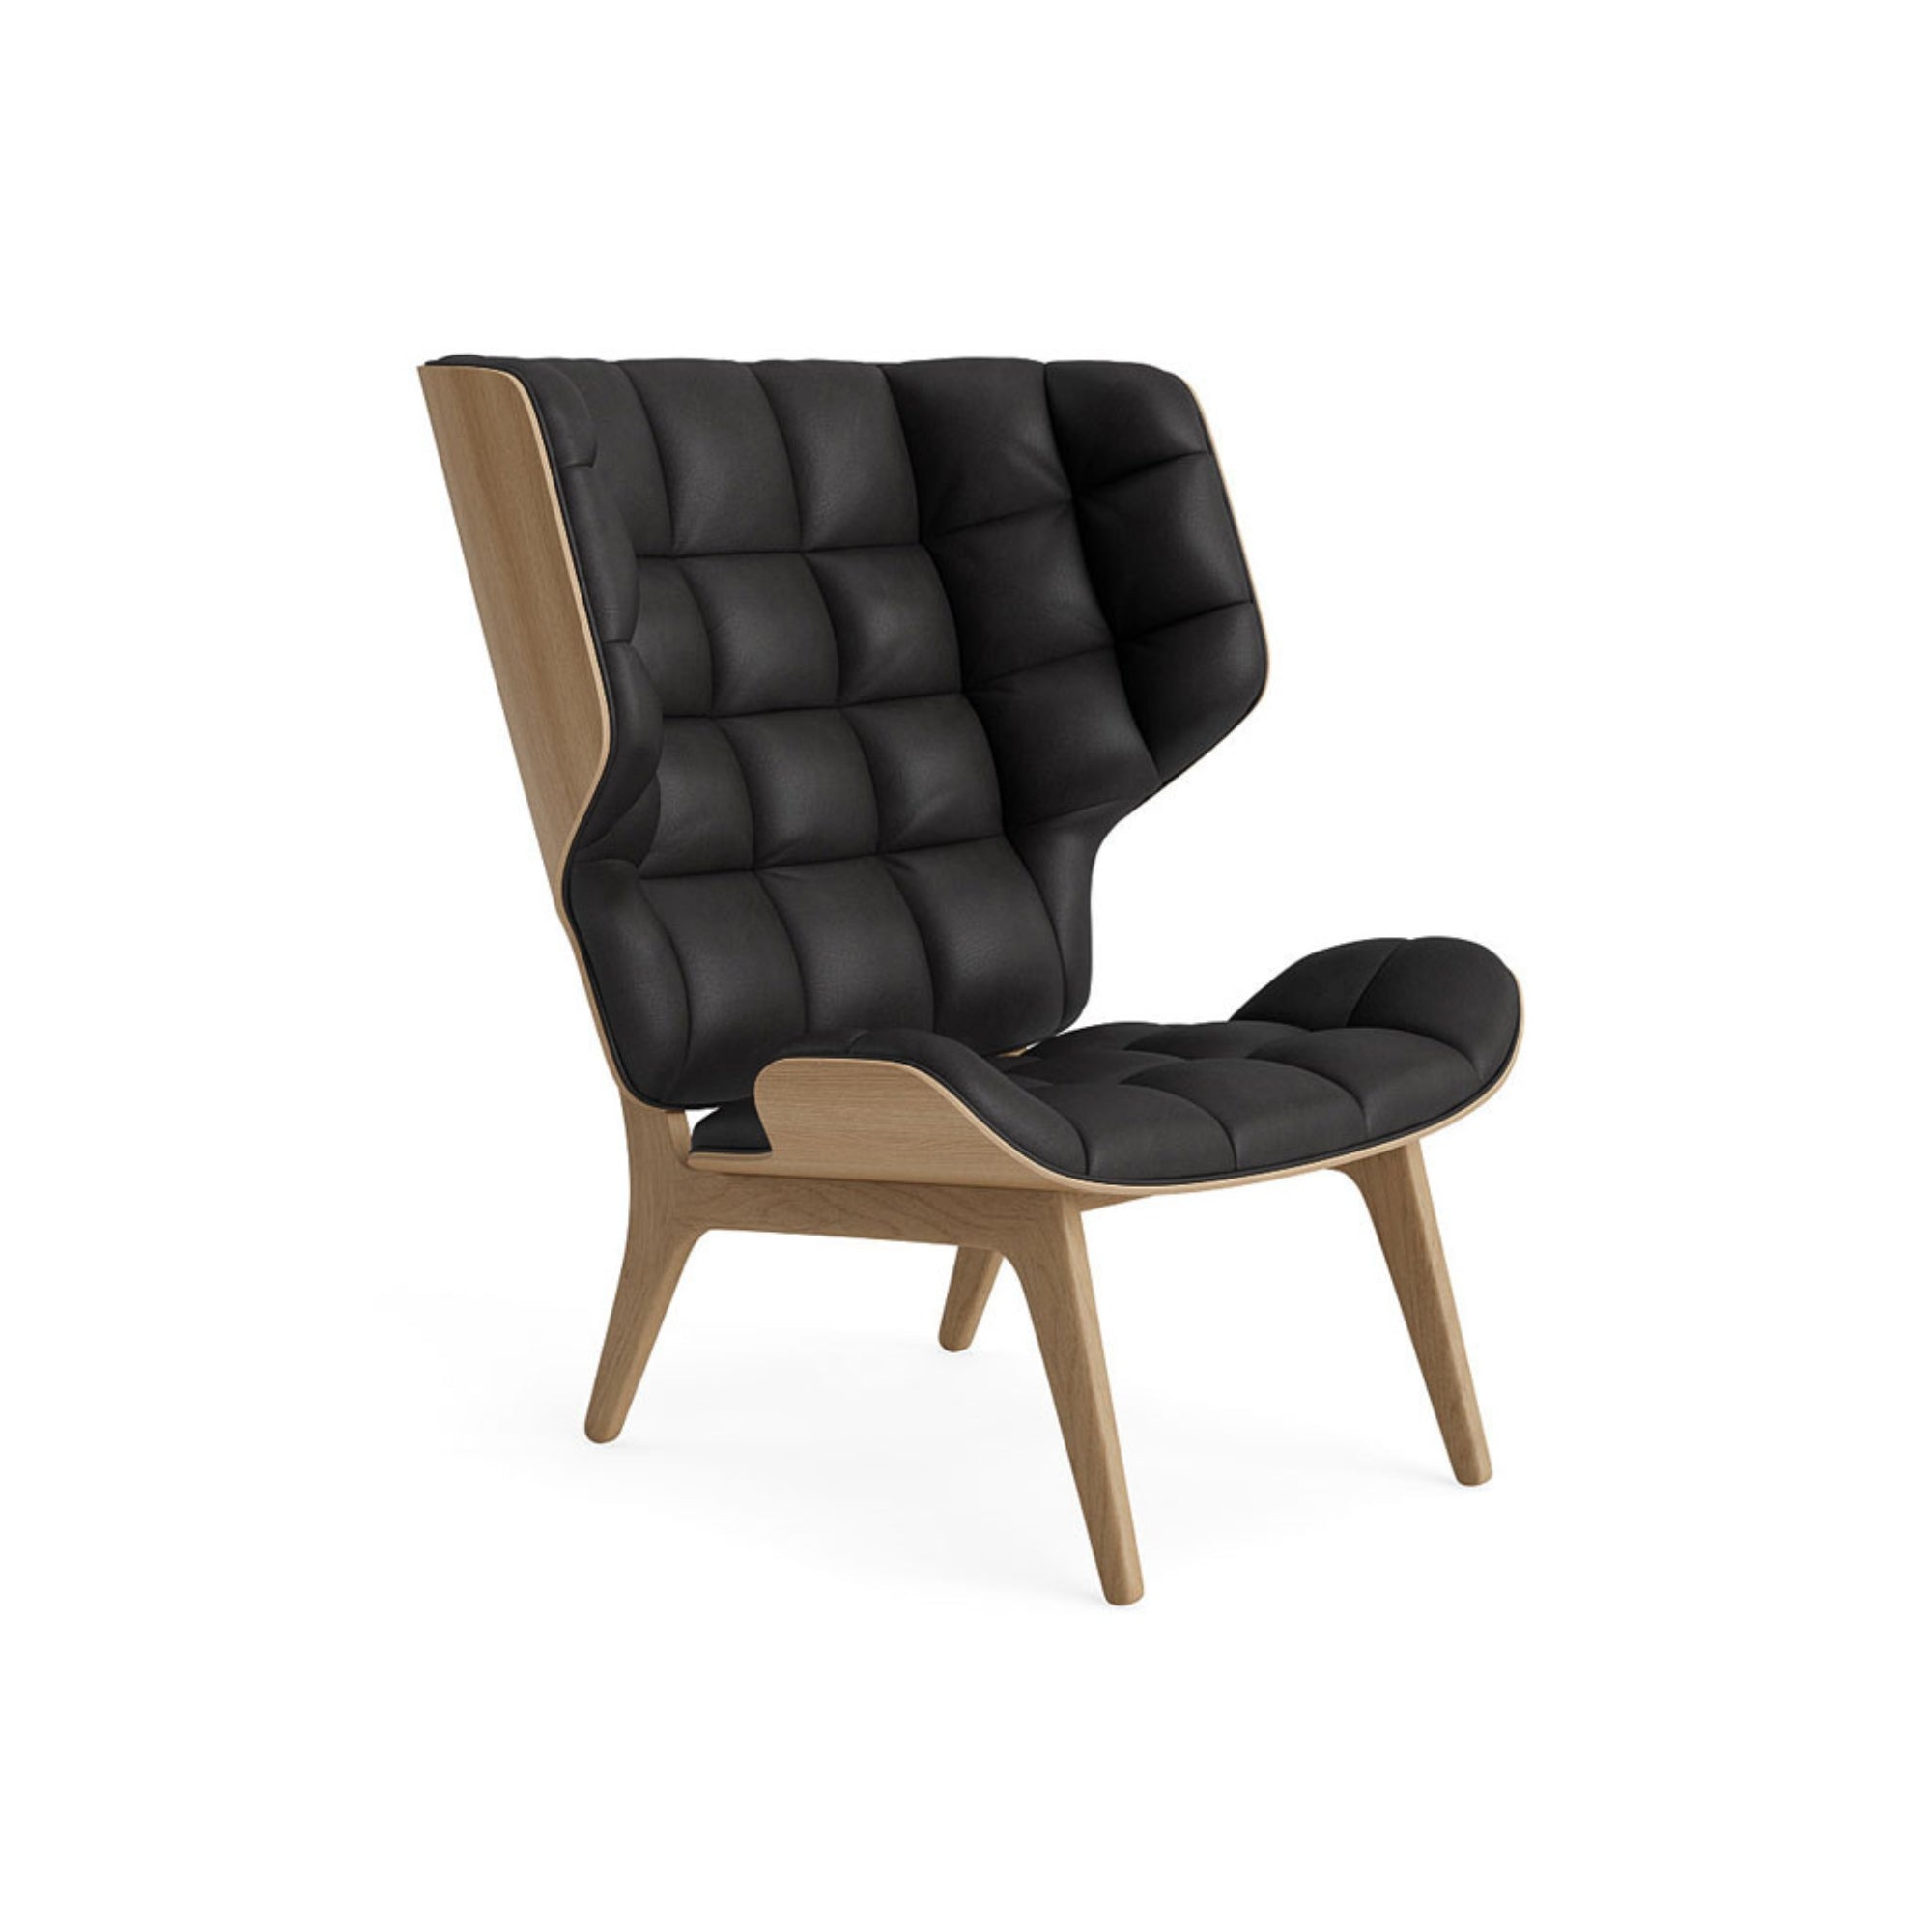 Mammoth Chair - Leather Armchair NORR11